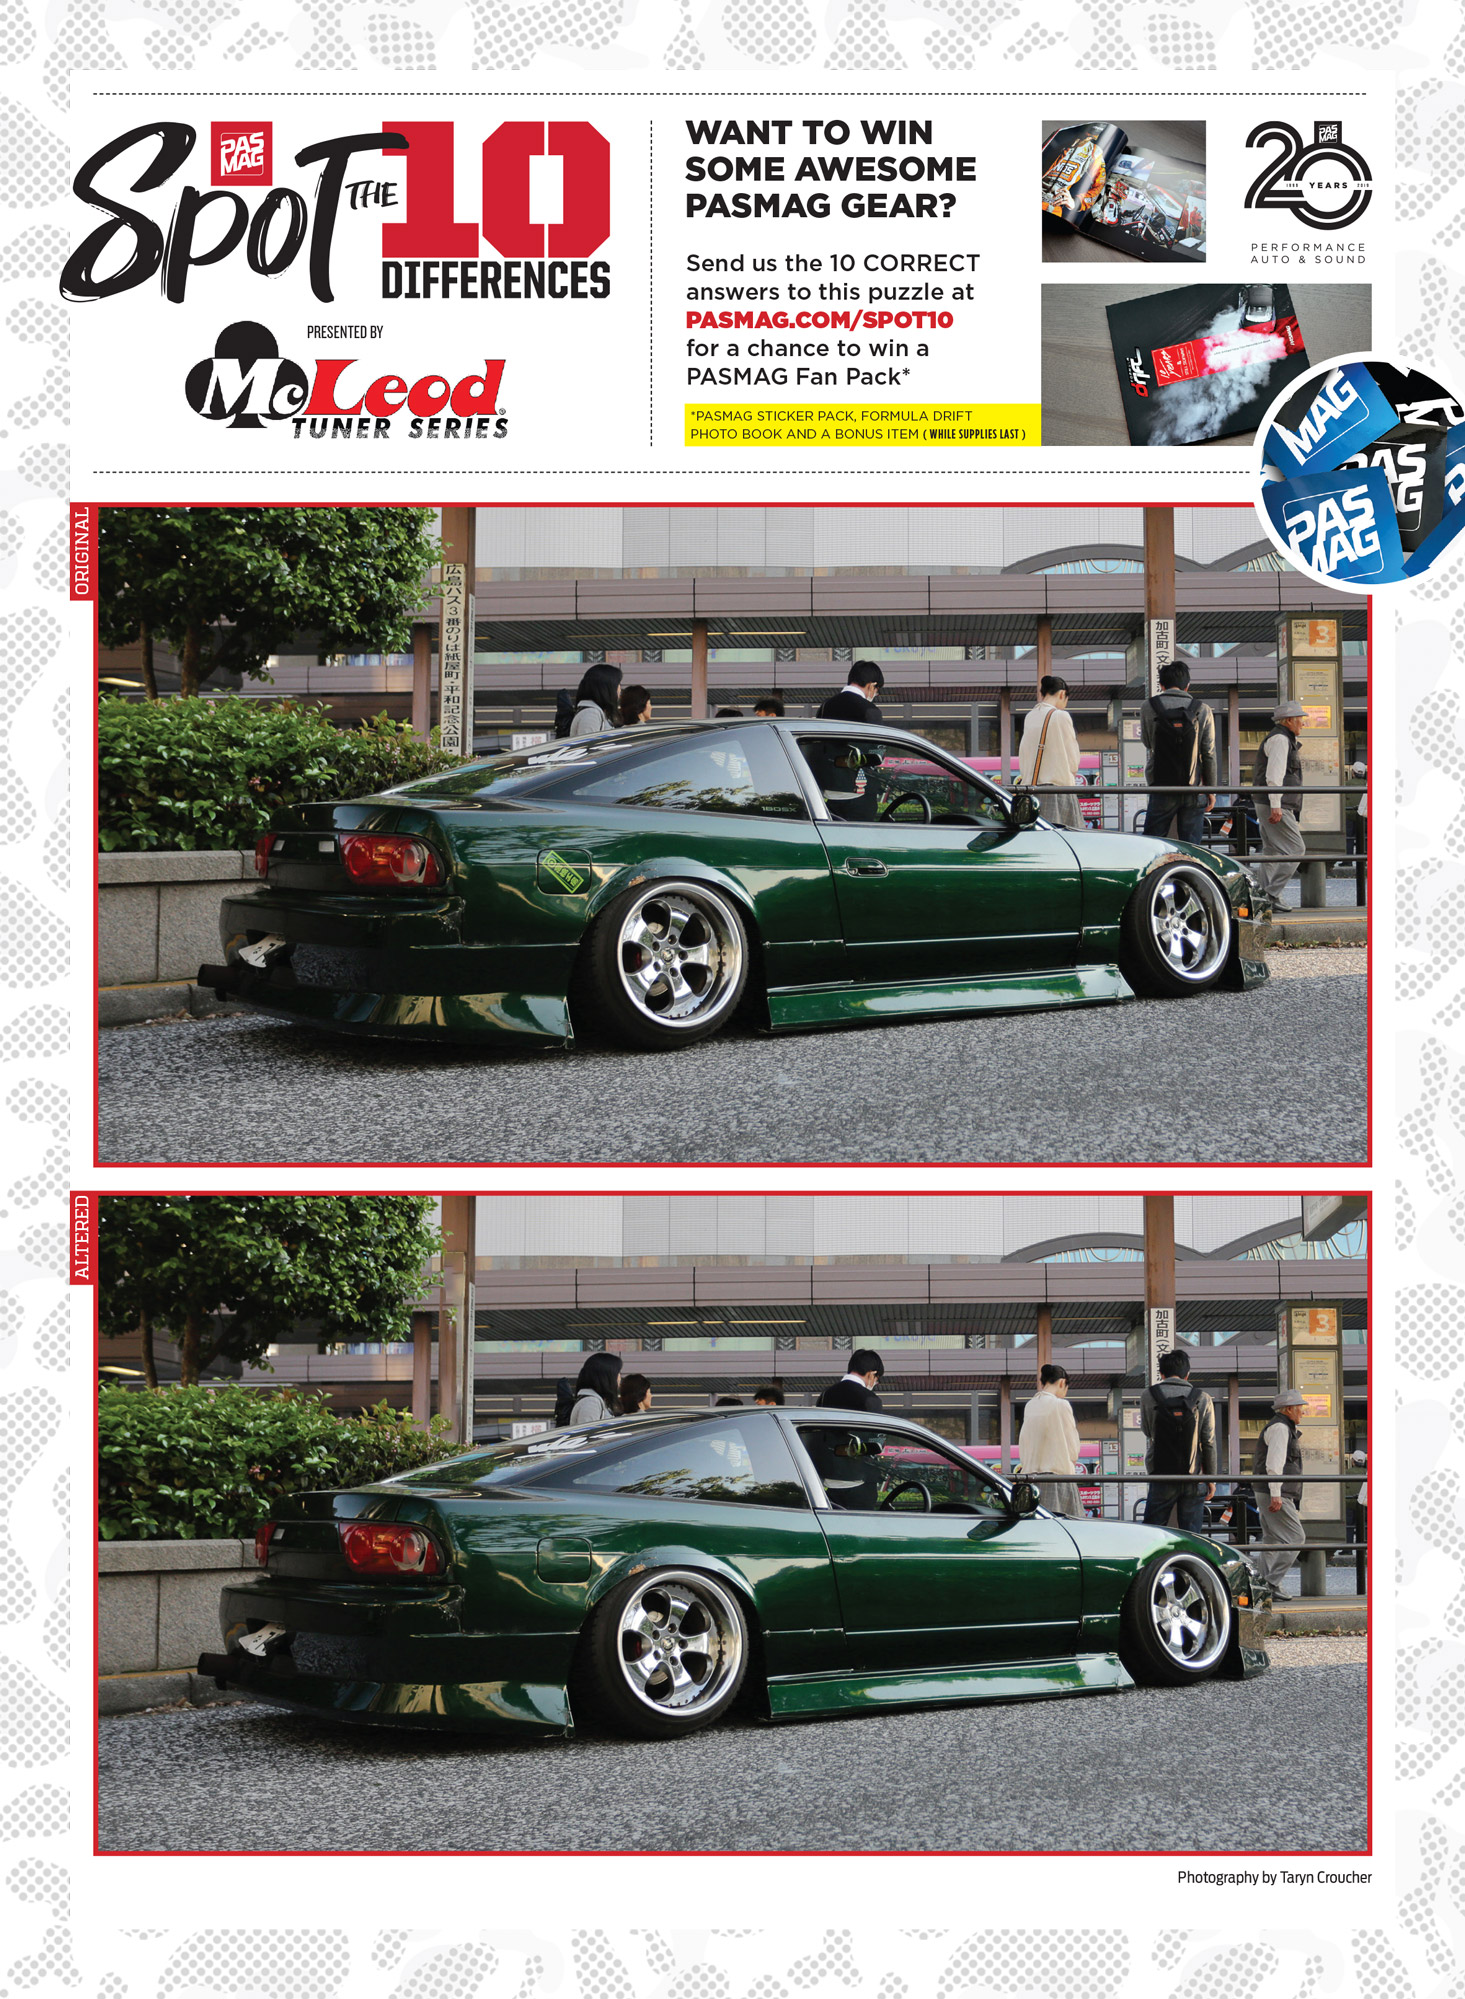 PASMAG Spot the Differences Mar 24 2020 Nissan 180sx 240sx silvia